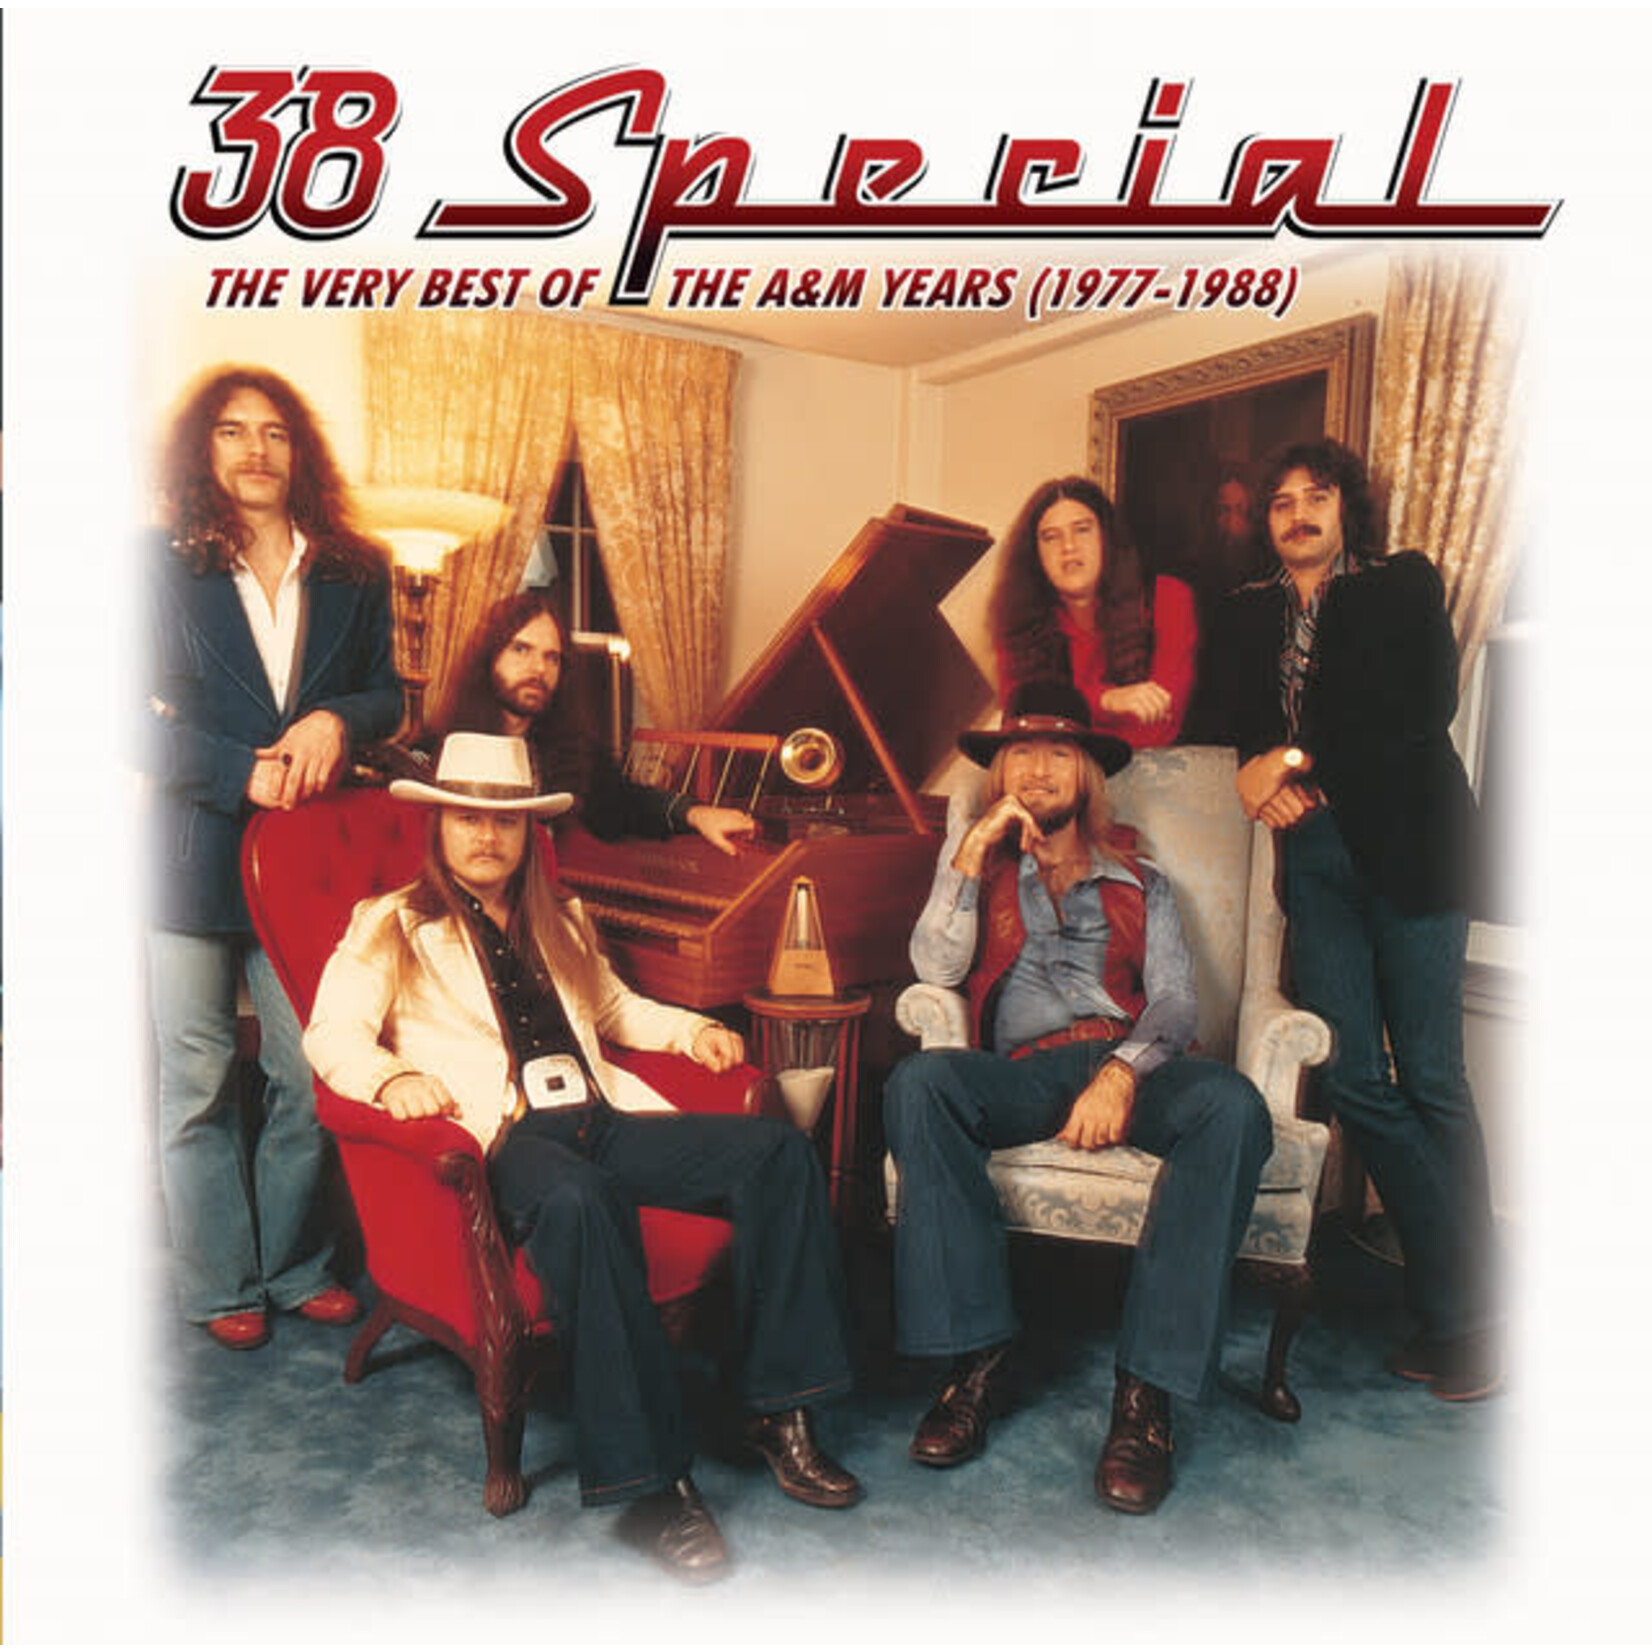 38 Special - The Very Best Of The A&M Years: 1977-1988 [CD]